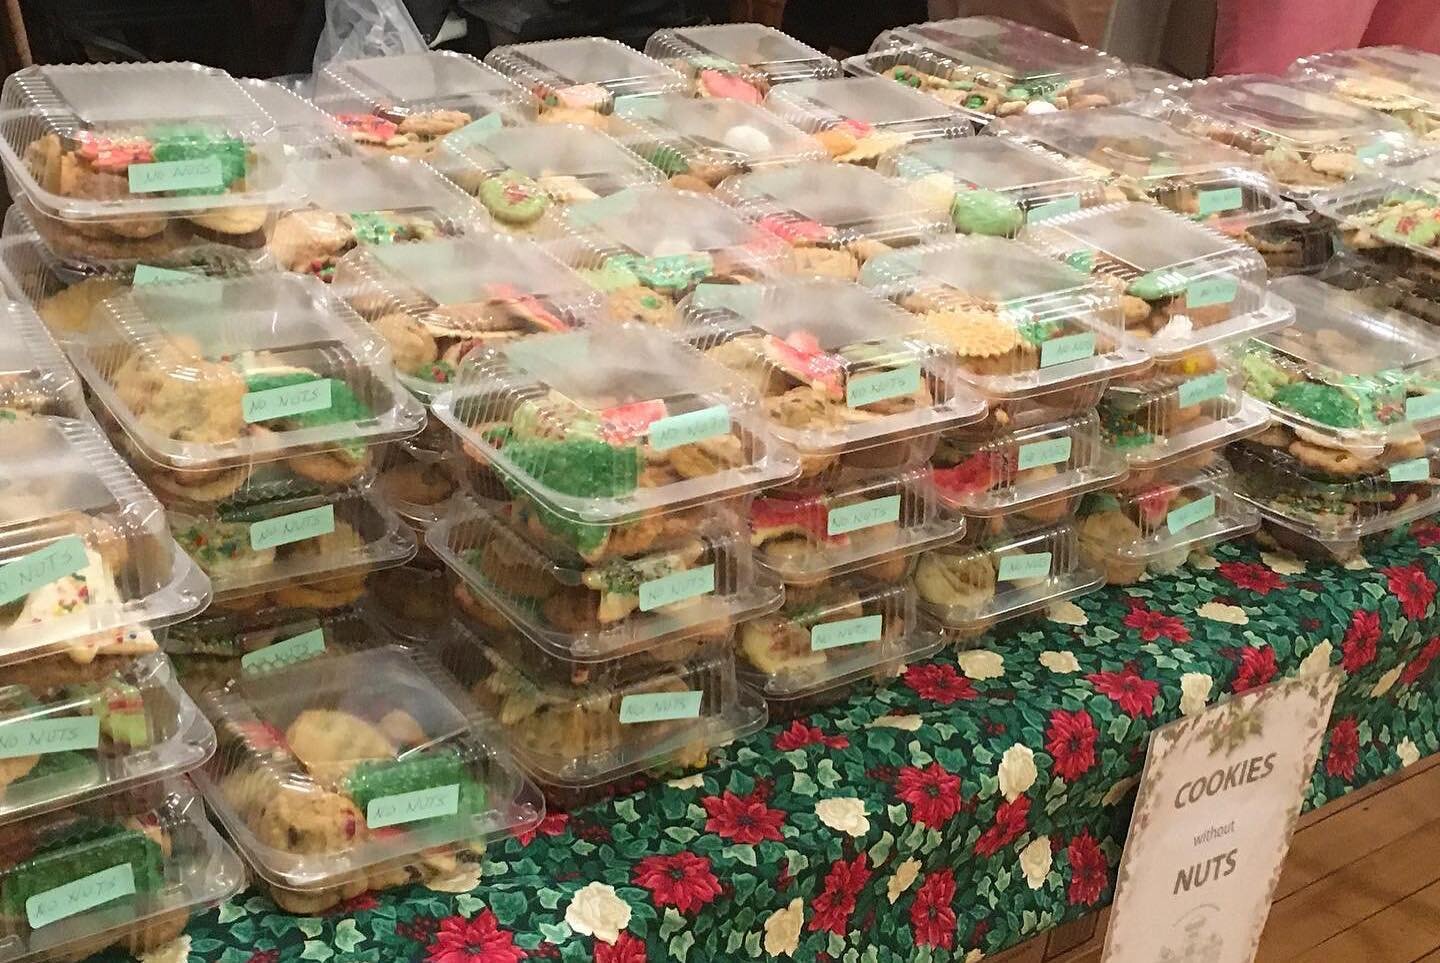 Are you dreaming of homemade Christmas cookies but don&rsquo;t have time to bake? We have you covered! Stop by the Holiday Festival this Saturday Nov 11th from 9:30-3:30 and pick up a box (or 2) of cookies home made by our wonderful volunteers! #shop